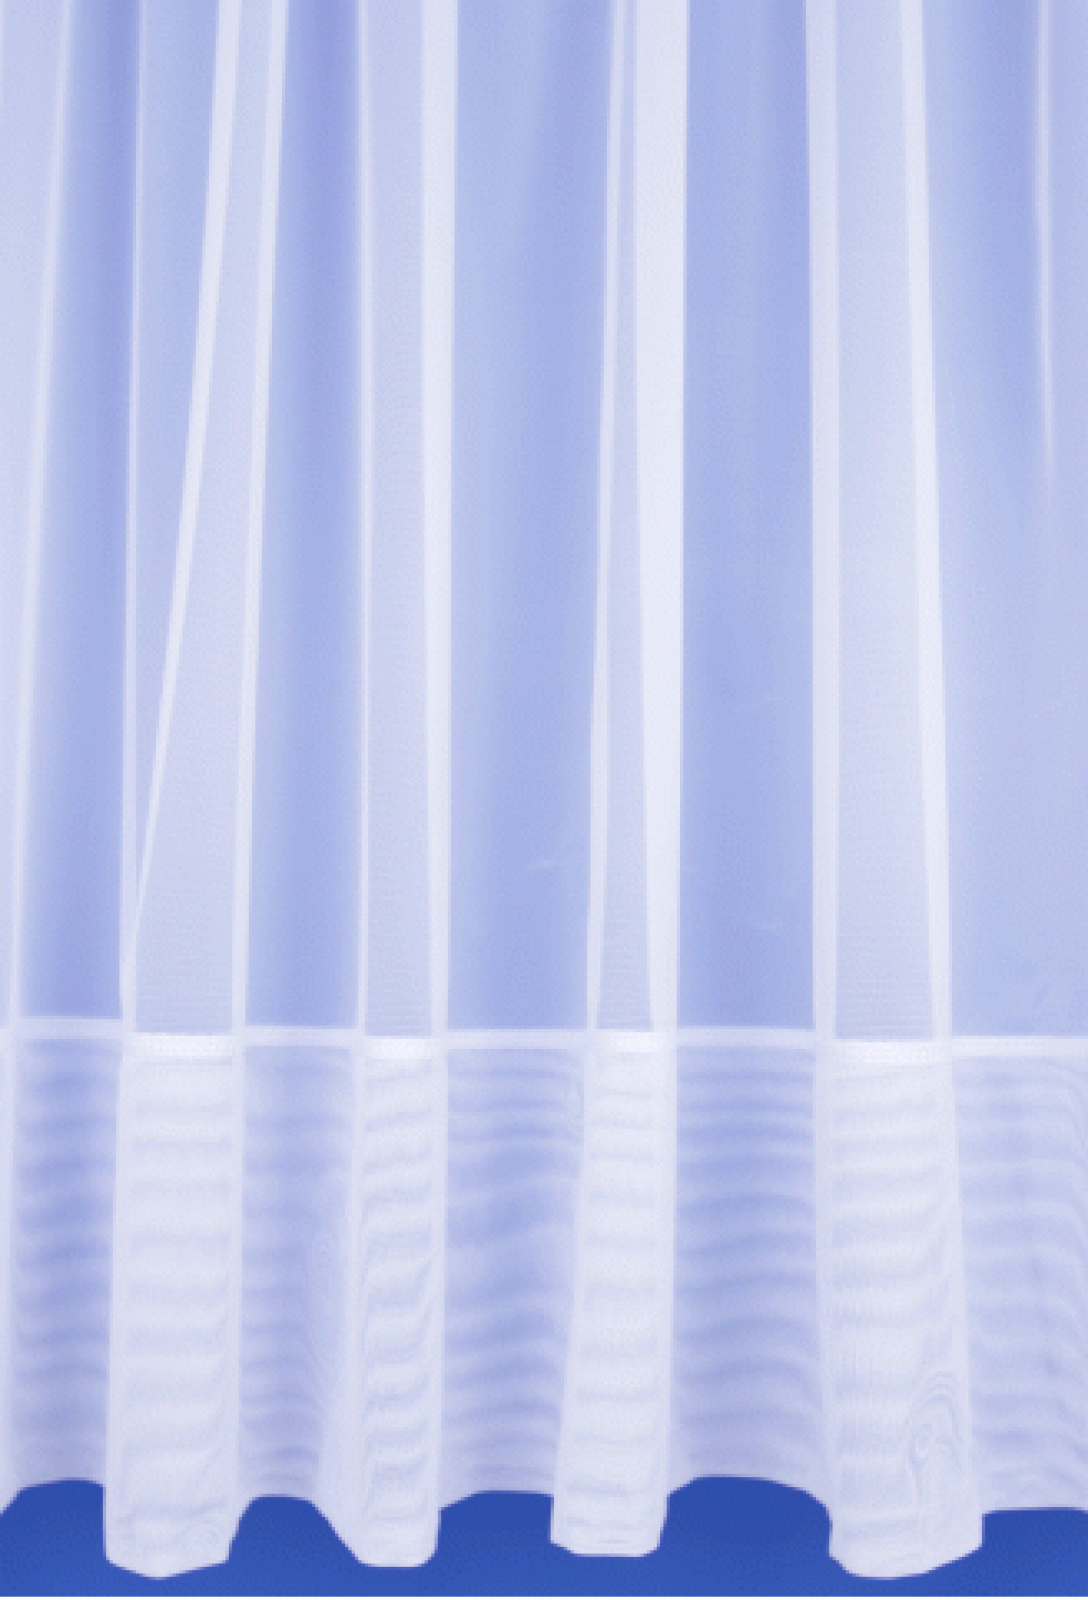 BIRDIE DESIGN WHITE QUALITY NET CURTAINS LONG DROPS 70"-90" x 1-10 METRES WIDE 